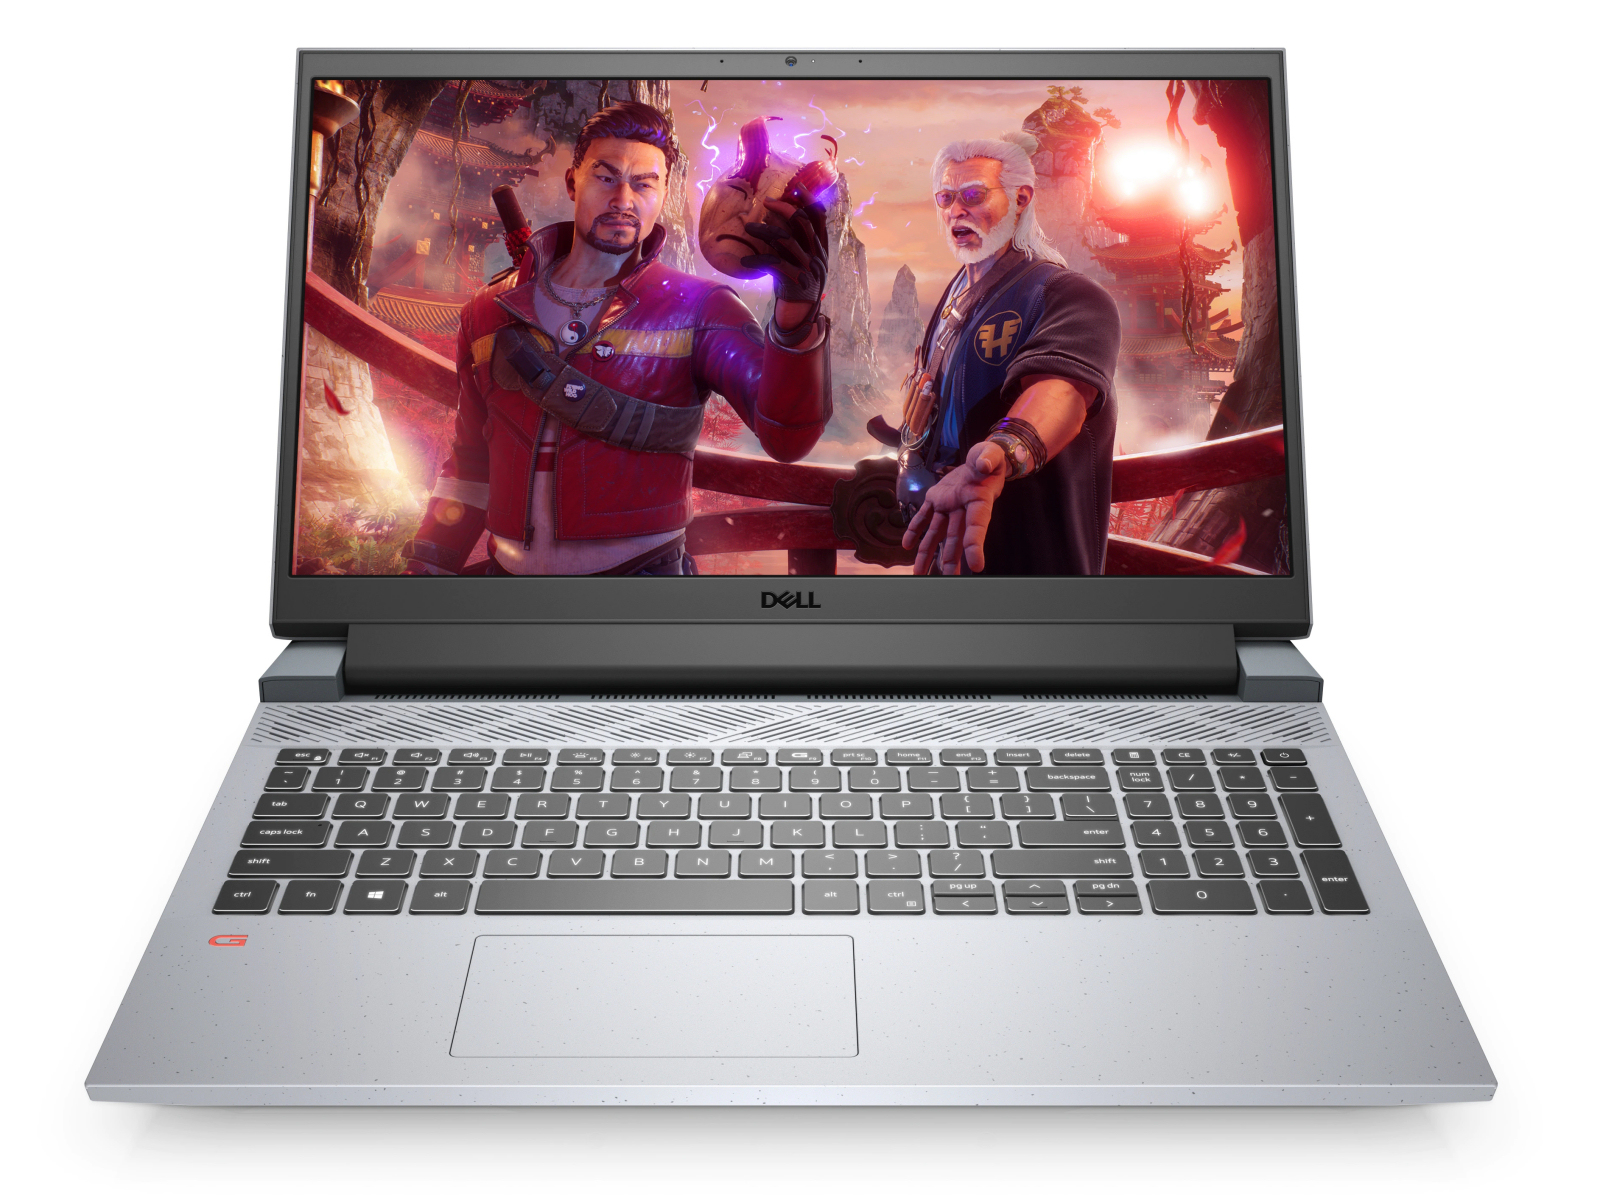 Dell G15 5515 Ryzen Edition review: An affordable FHD gaming laptop - NotebookCheck.net Reviews